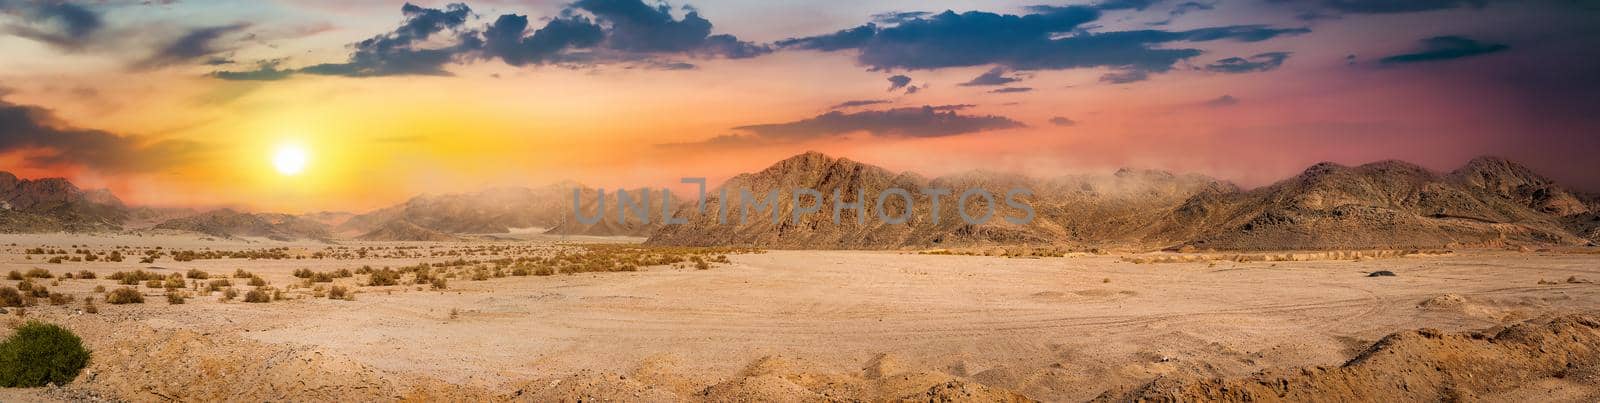 View on desert with mountains at sunrise, Egypt